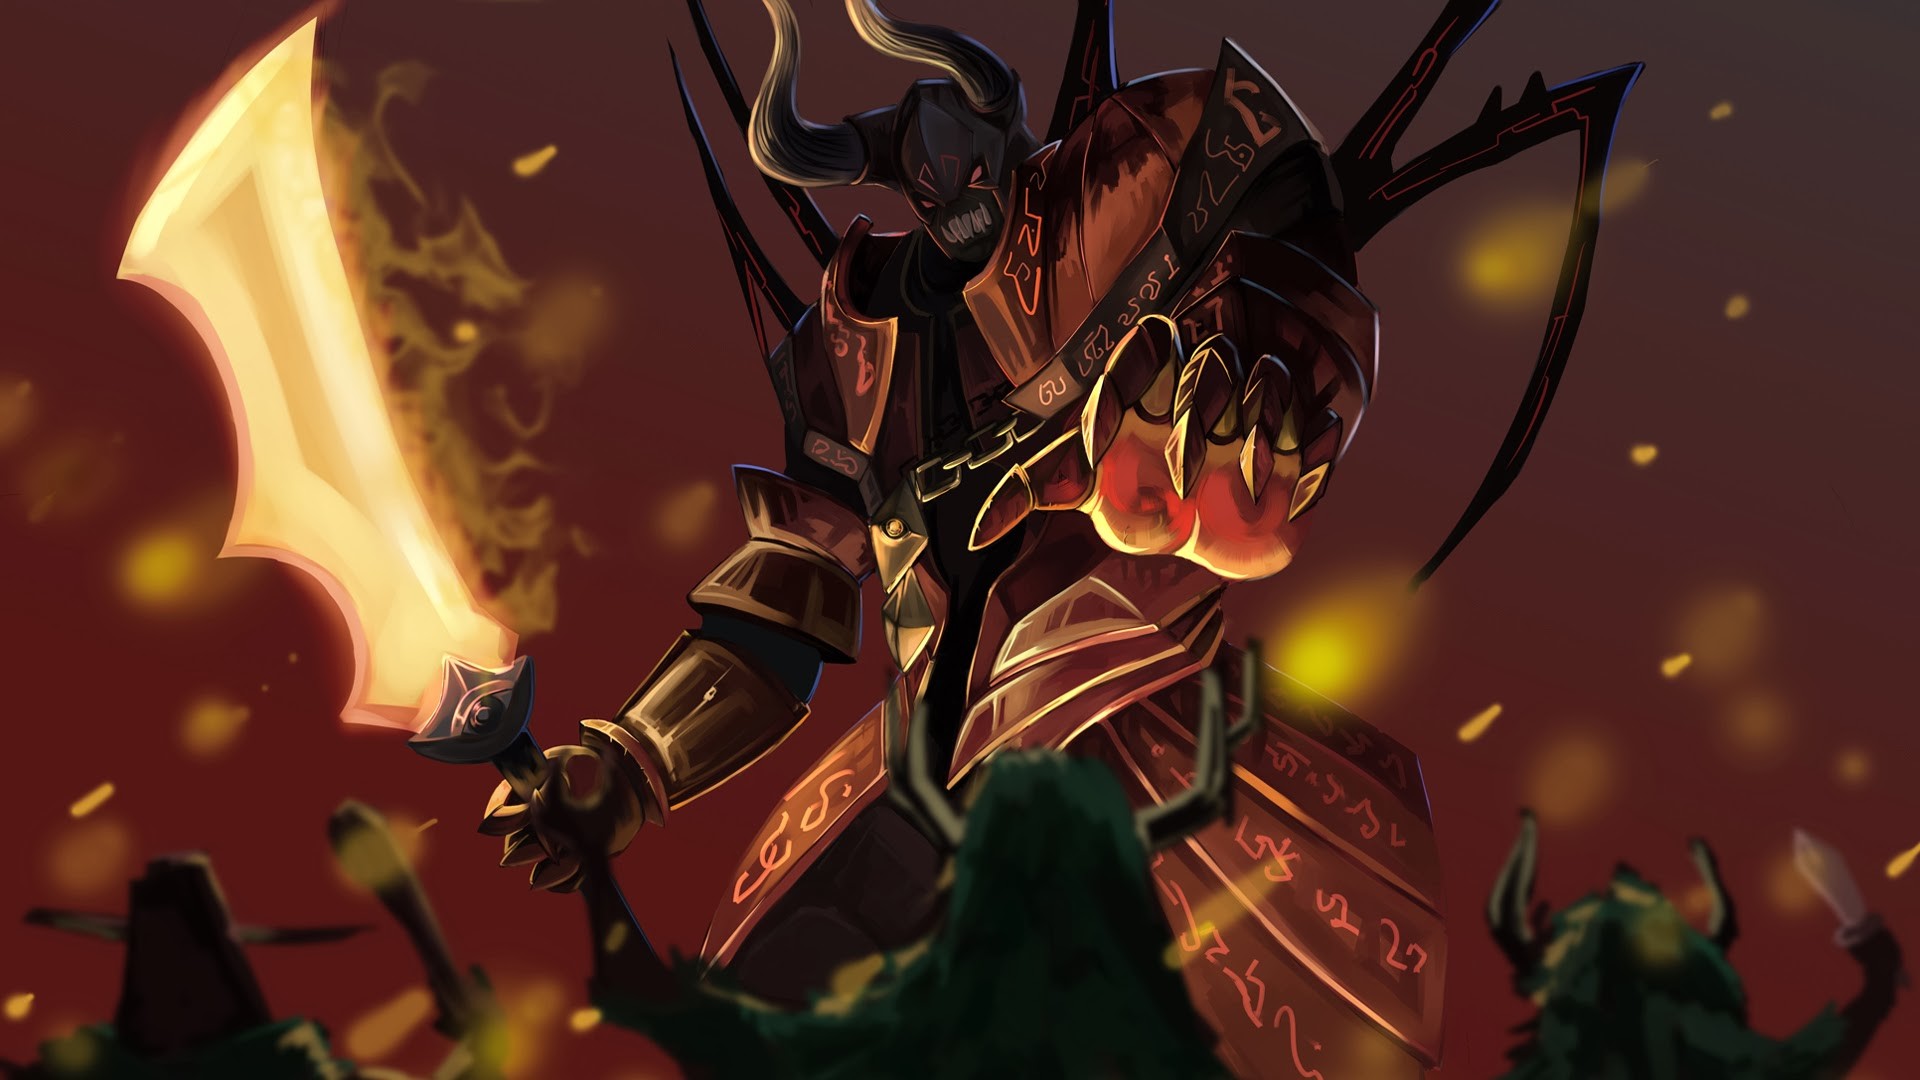 1920x1080 Angry Doom Wallpaper, more: http://dota2walls.com/doom/angry-doom | Dota 2  Wallpapers | Pinterest | Wallpaper, Game concept art and Game concept